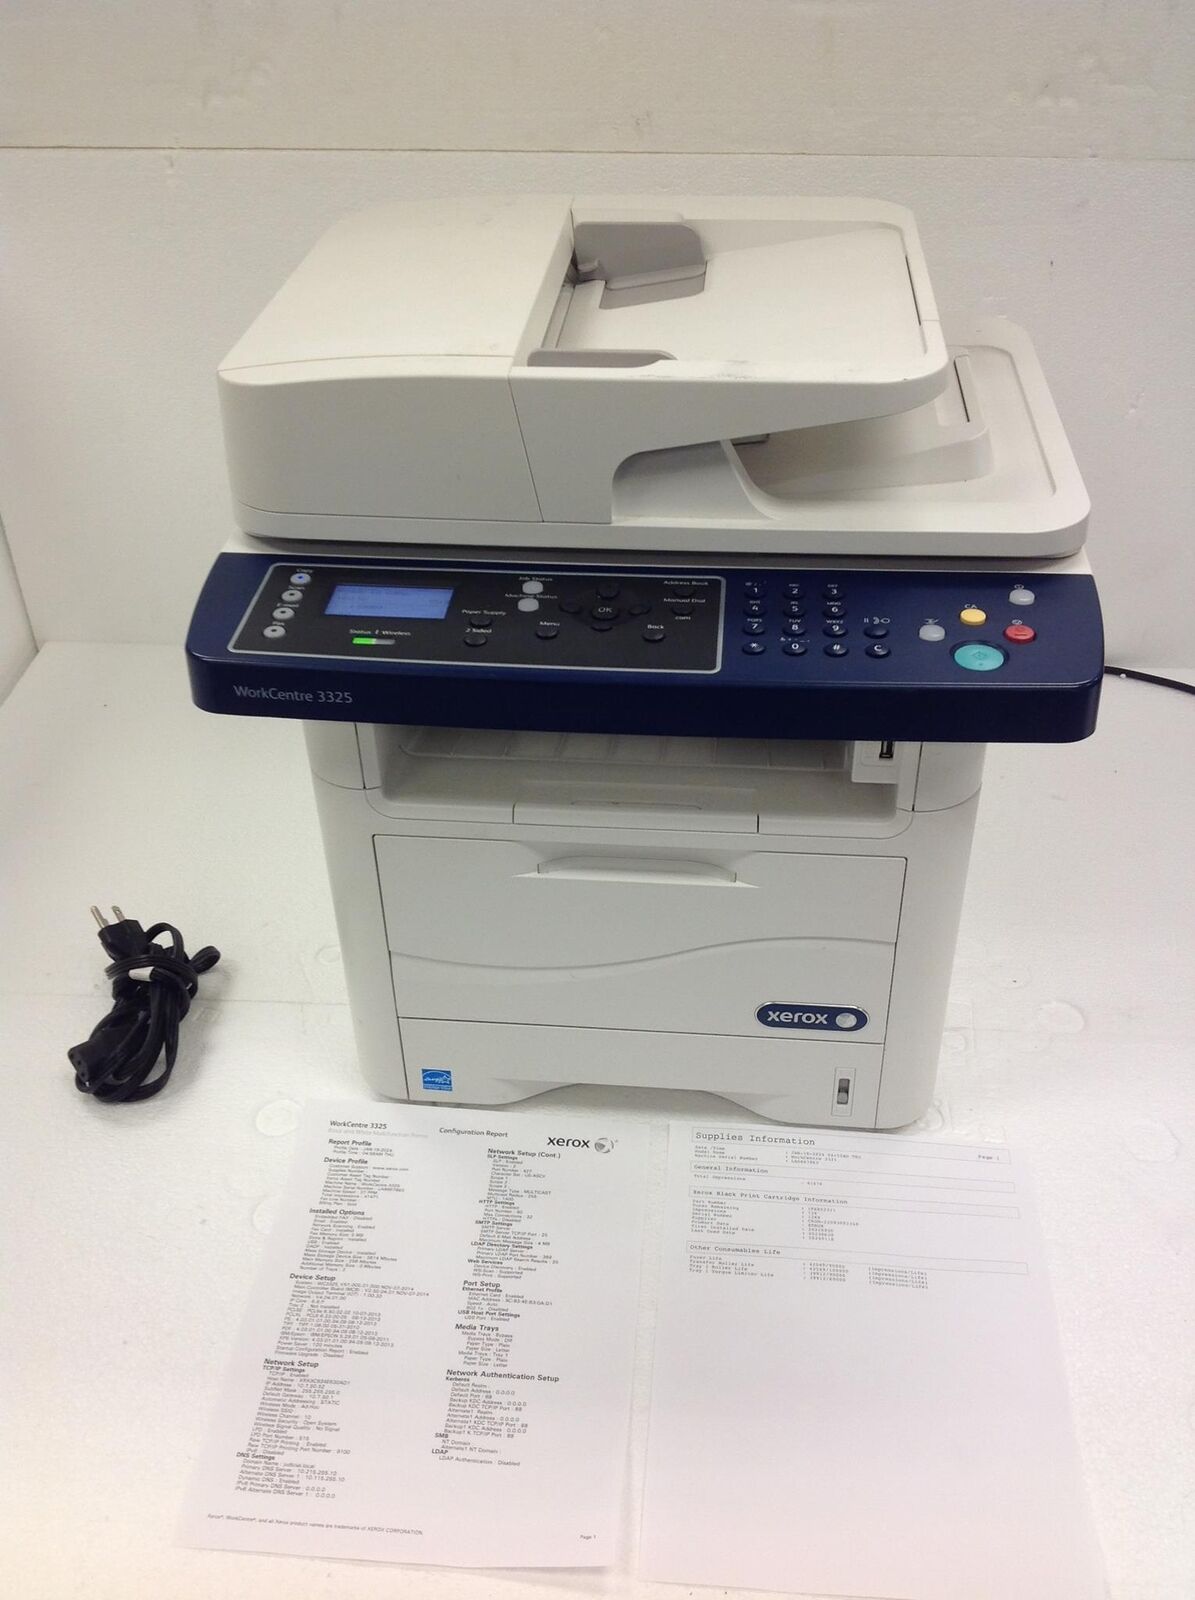 XEROX WORKCENTRE 3325 Mono Laser Printer with Toner/41K Pages Printed WORKING